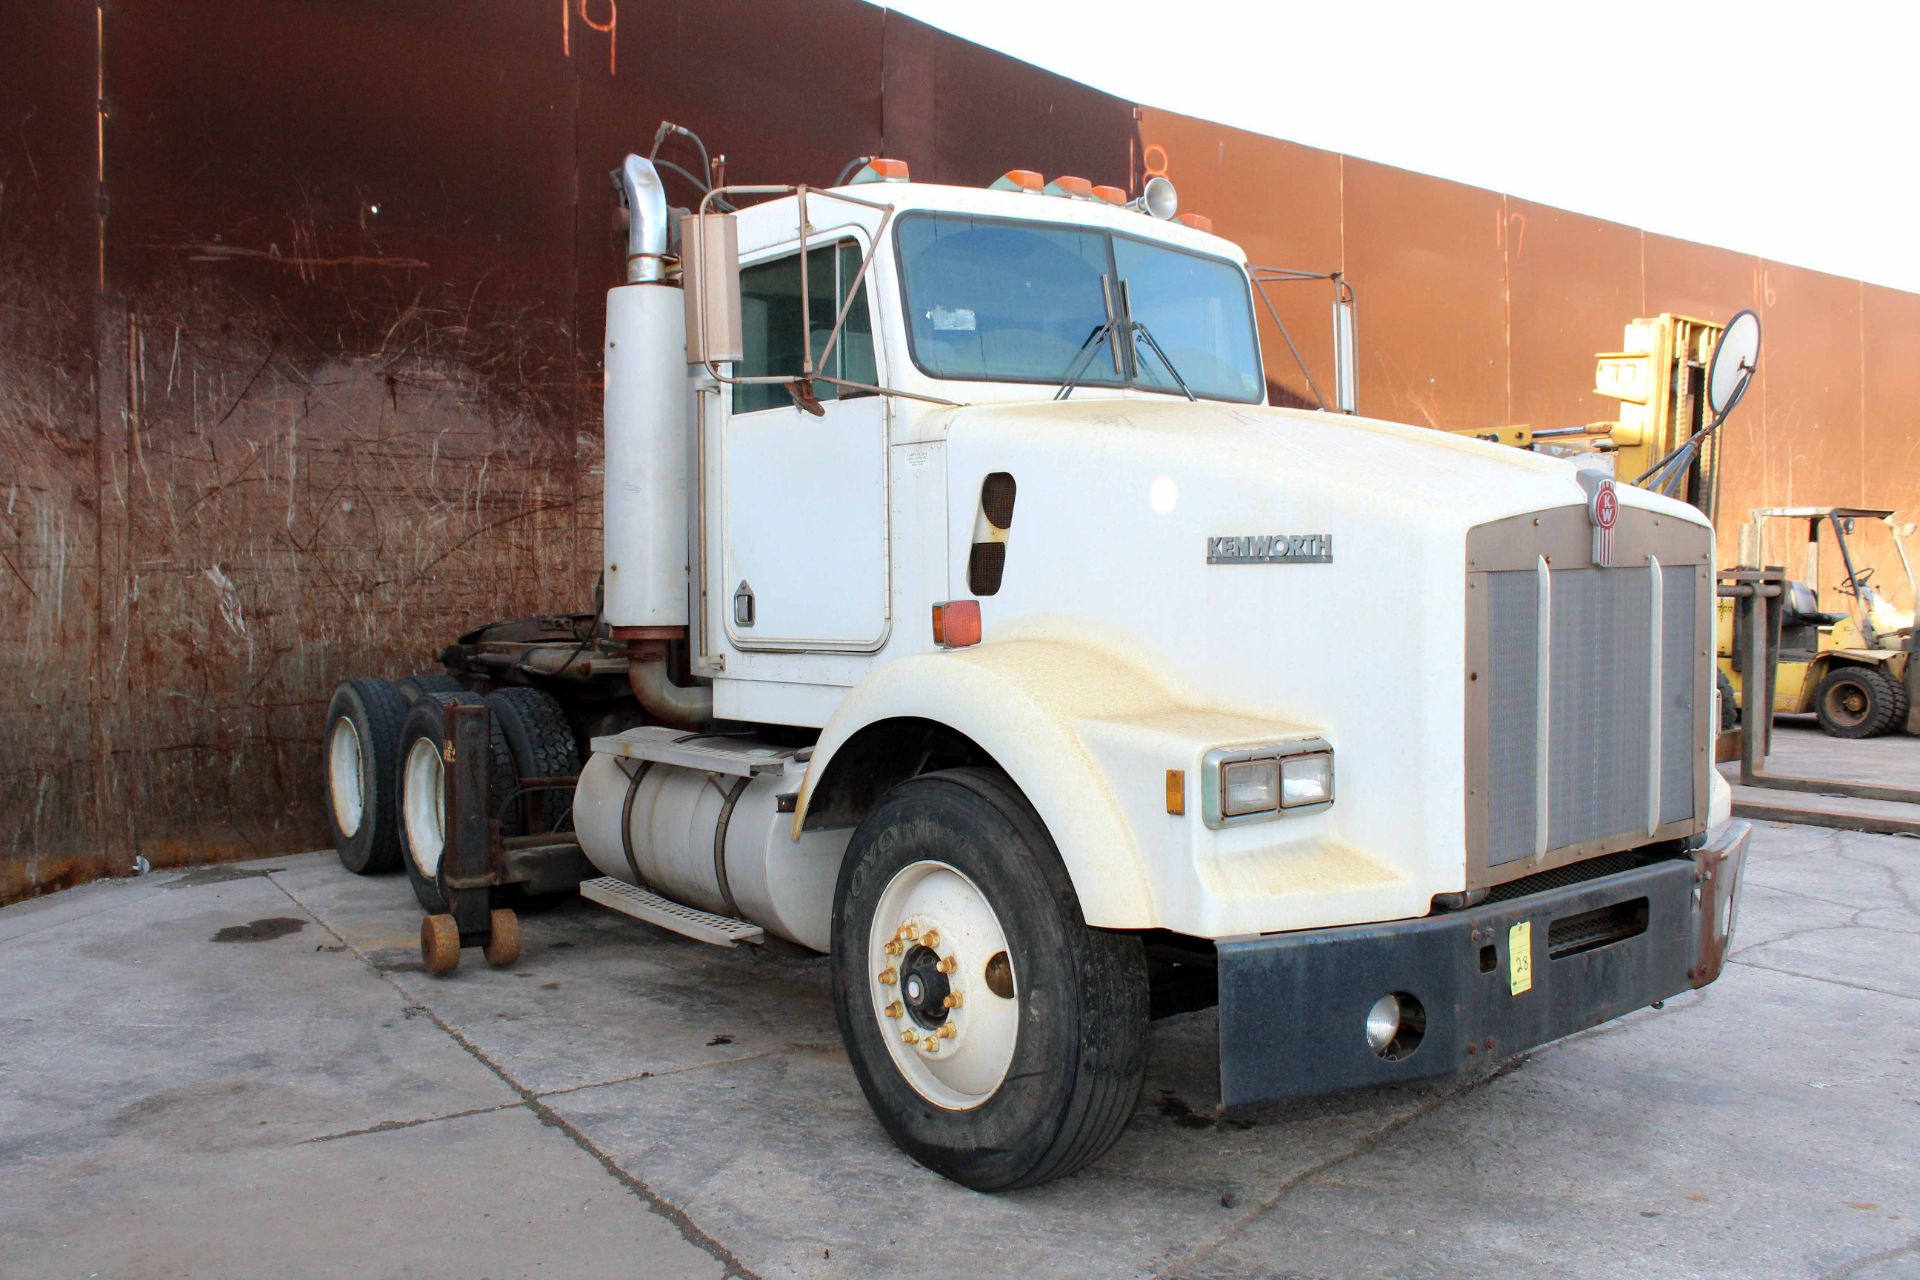 TILT LIFT TRACTOR, KENWORTH, new 1988, Odo: 740,000 miles, Chassis No. M515122 - Image 3 of 7